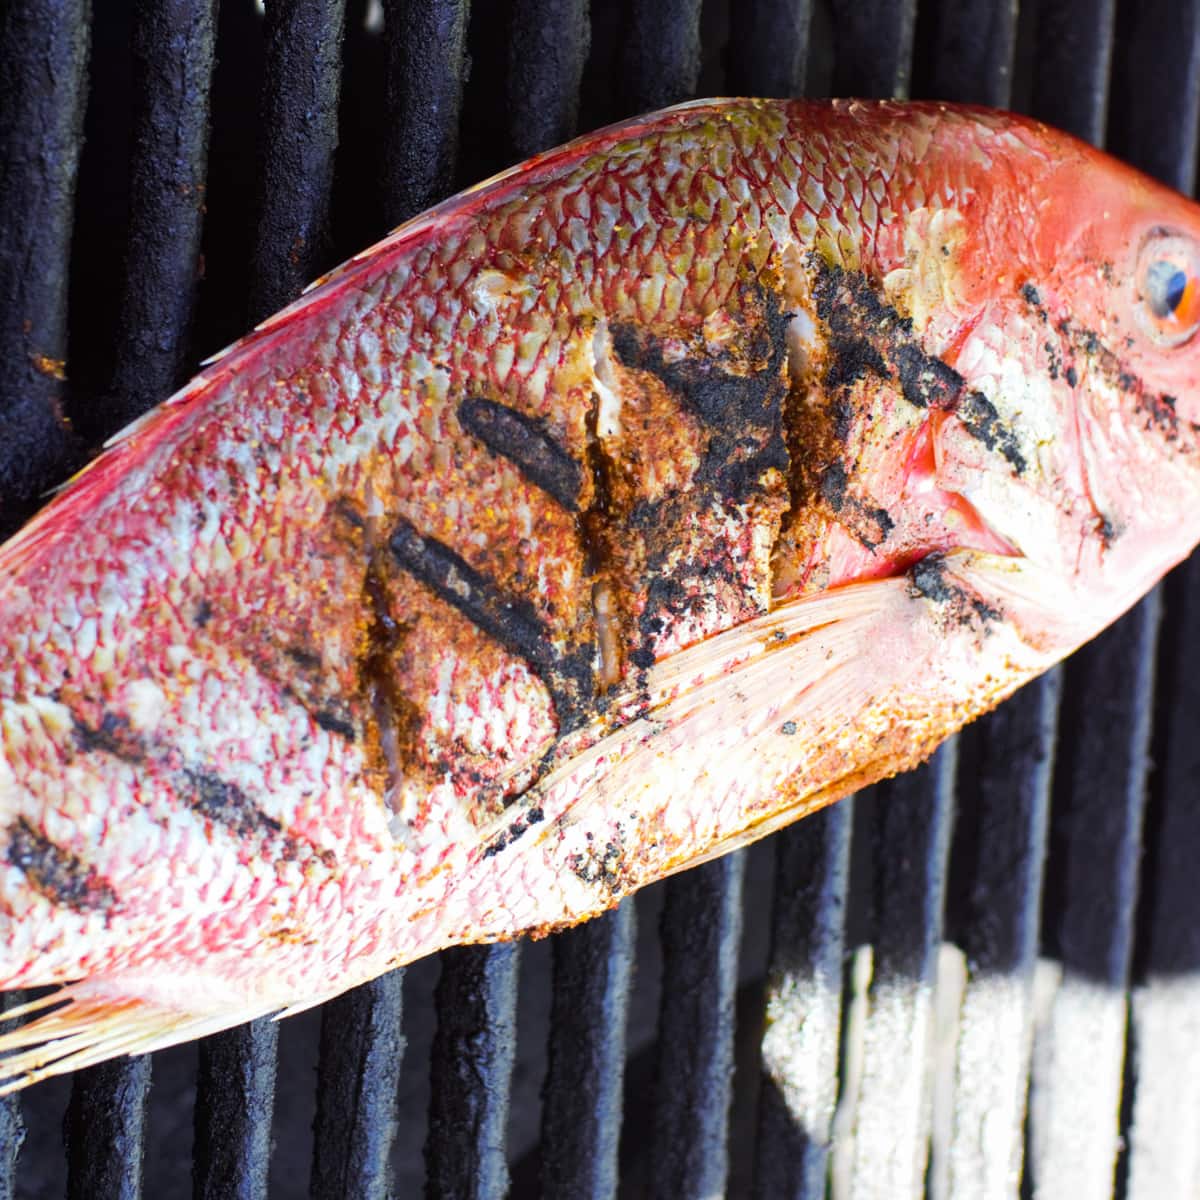 Grilled whole fish, red snapper, on a Big Green Egg.